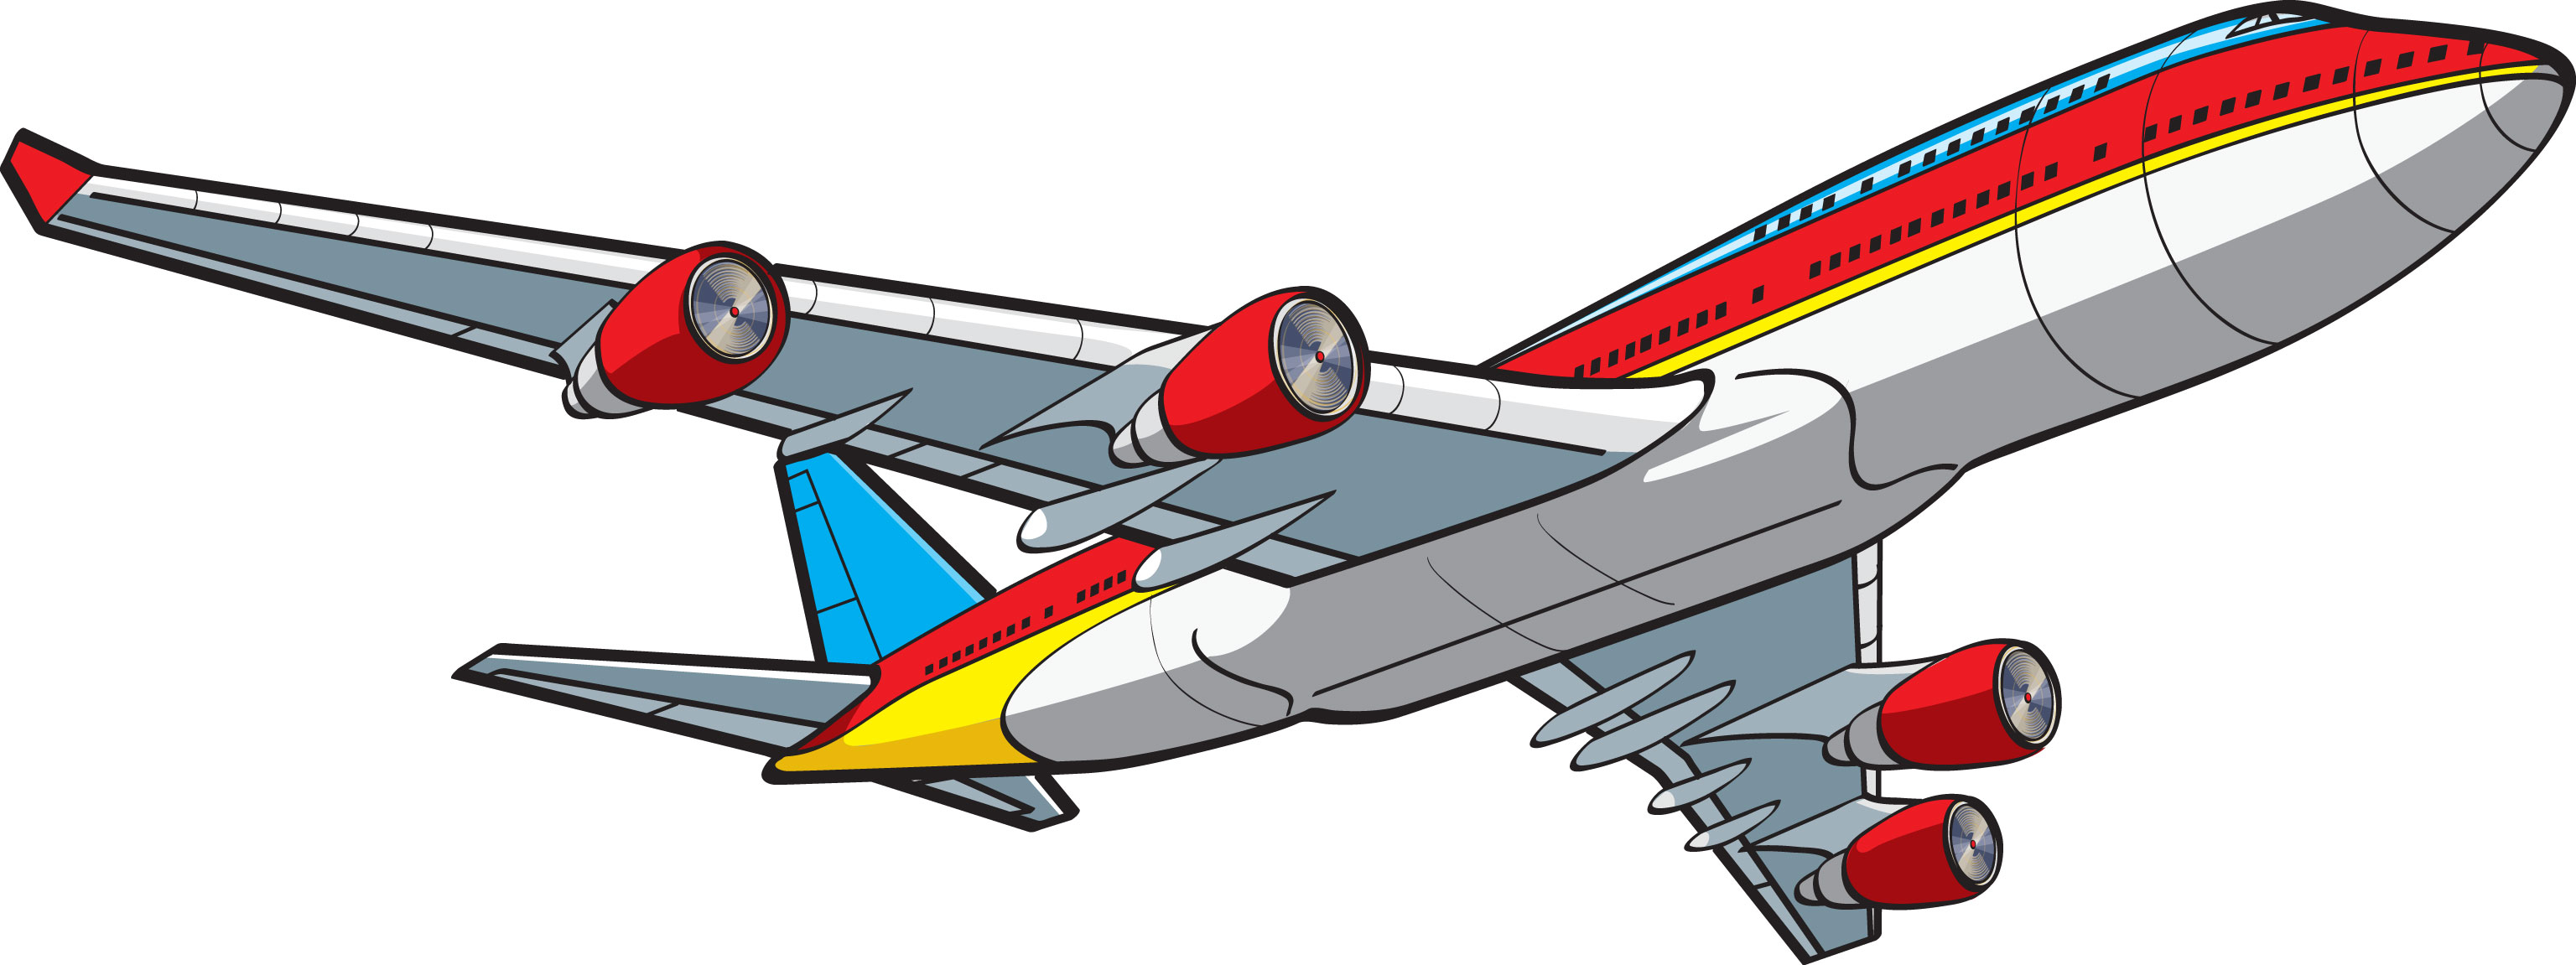 Cartoon airplane clipart free clipart images 4